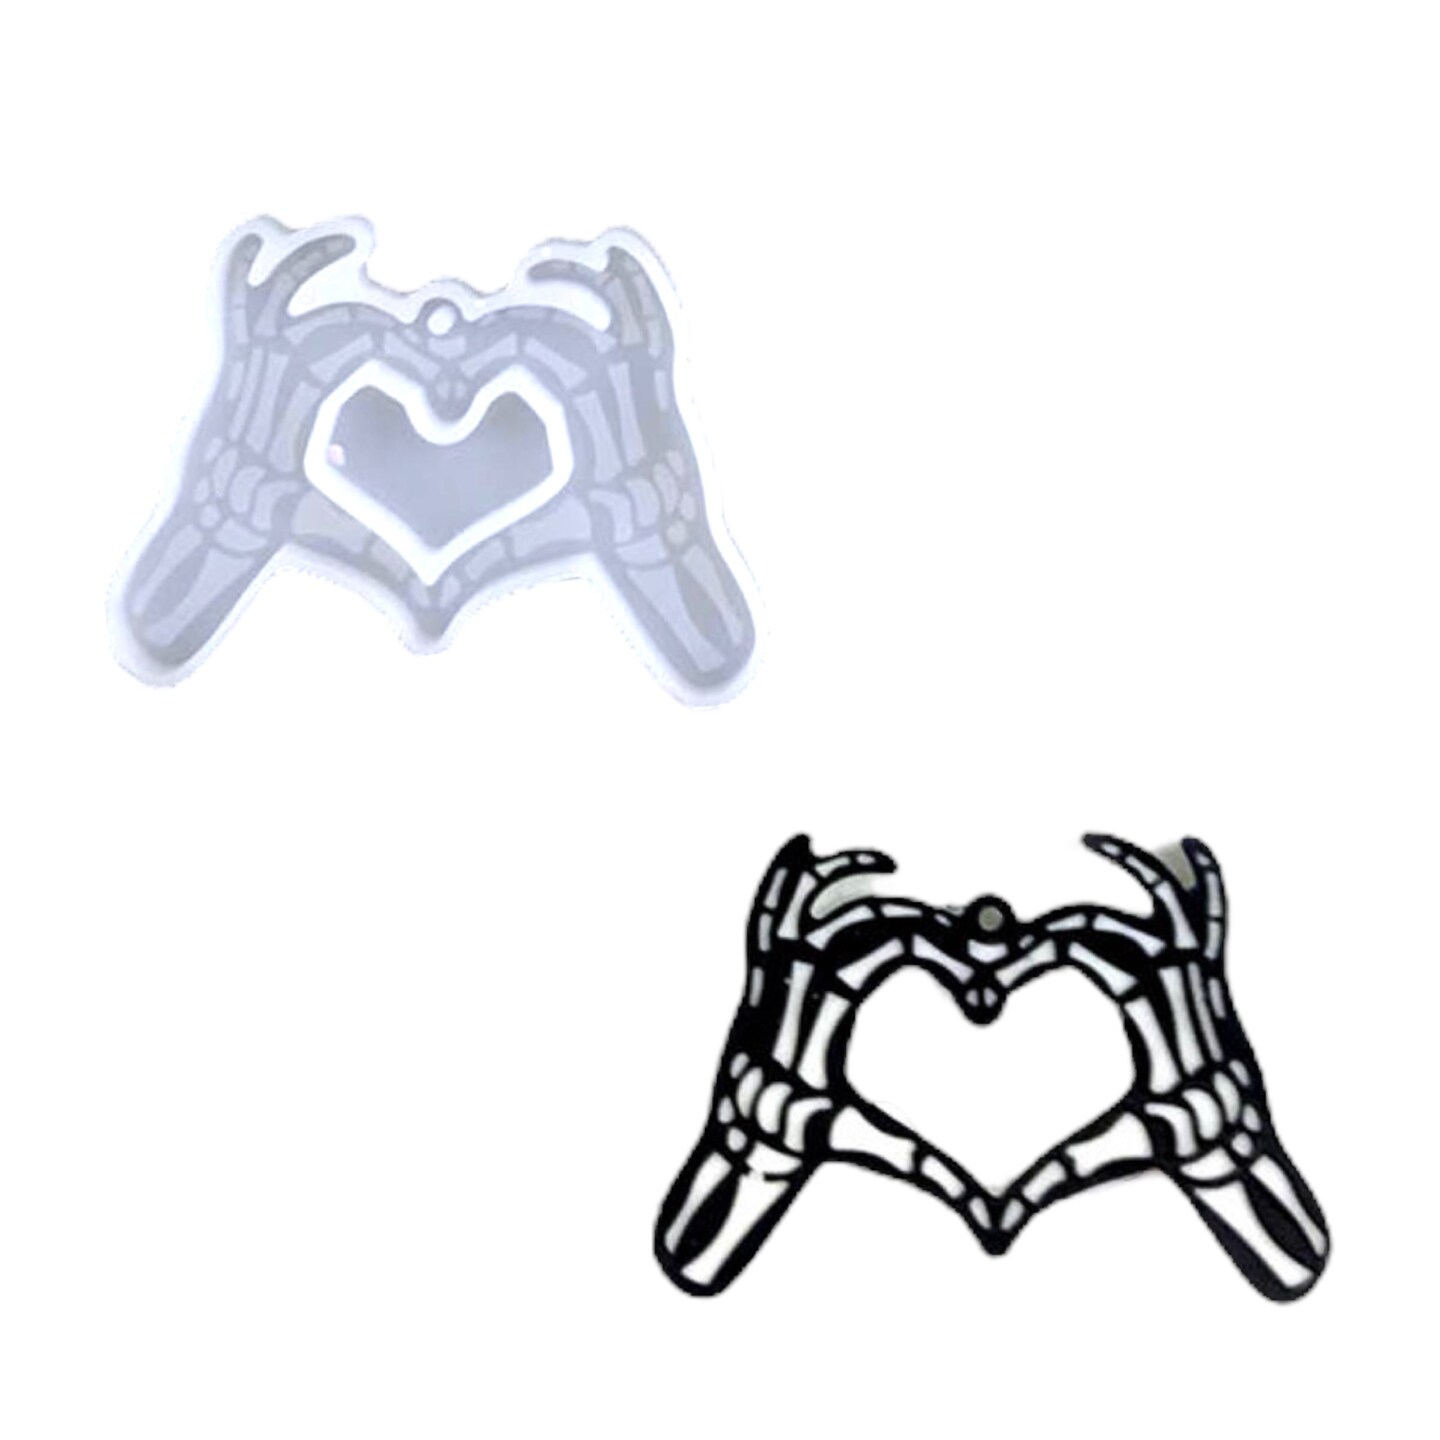 Heart Skeleton Hands Keychain or Ornament Mold for Epoxy or UV Resin